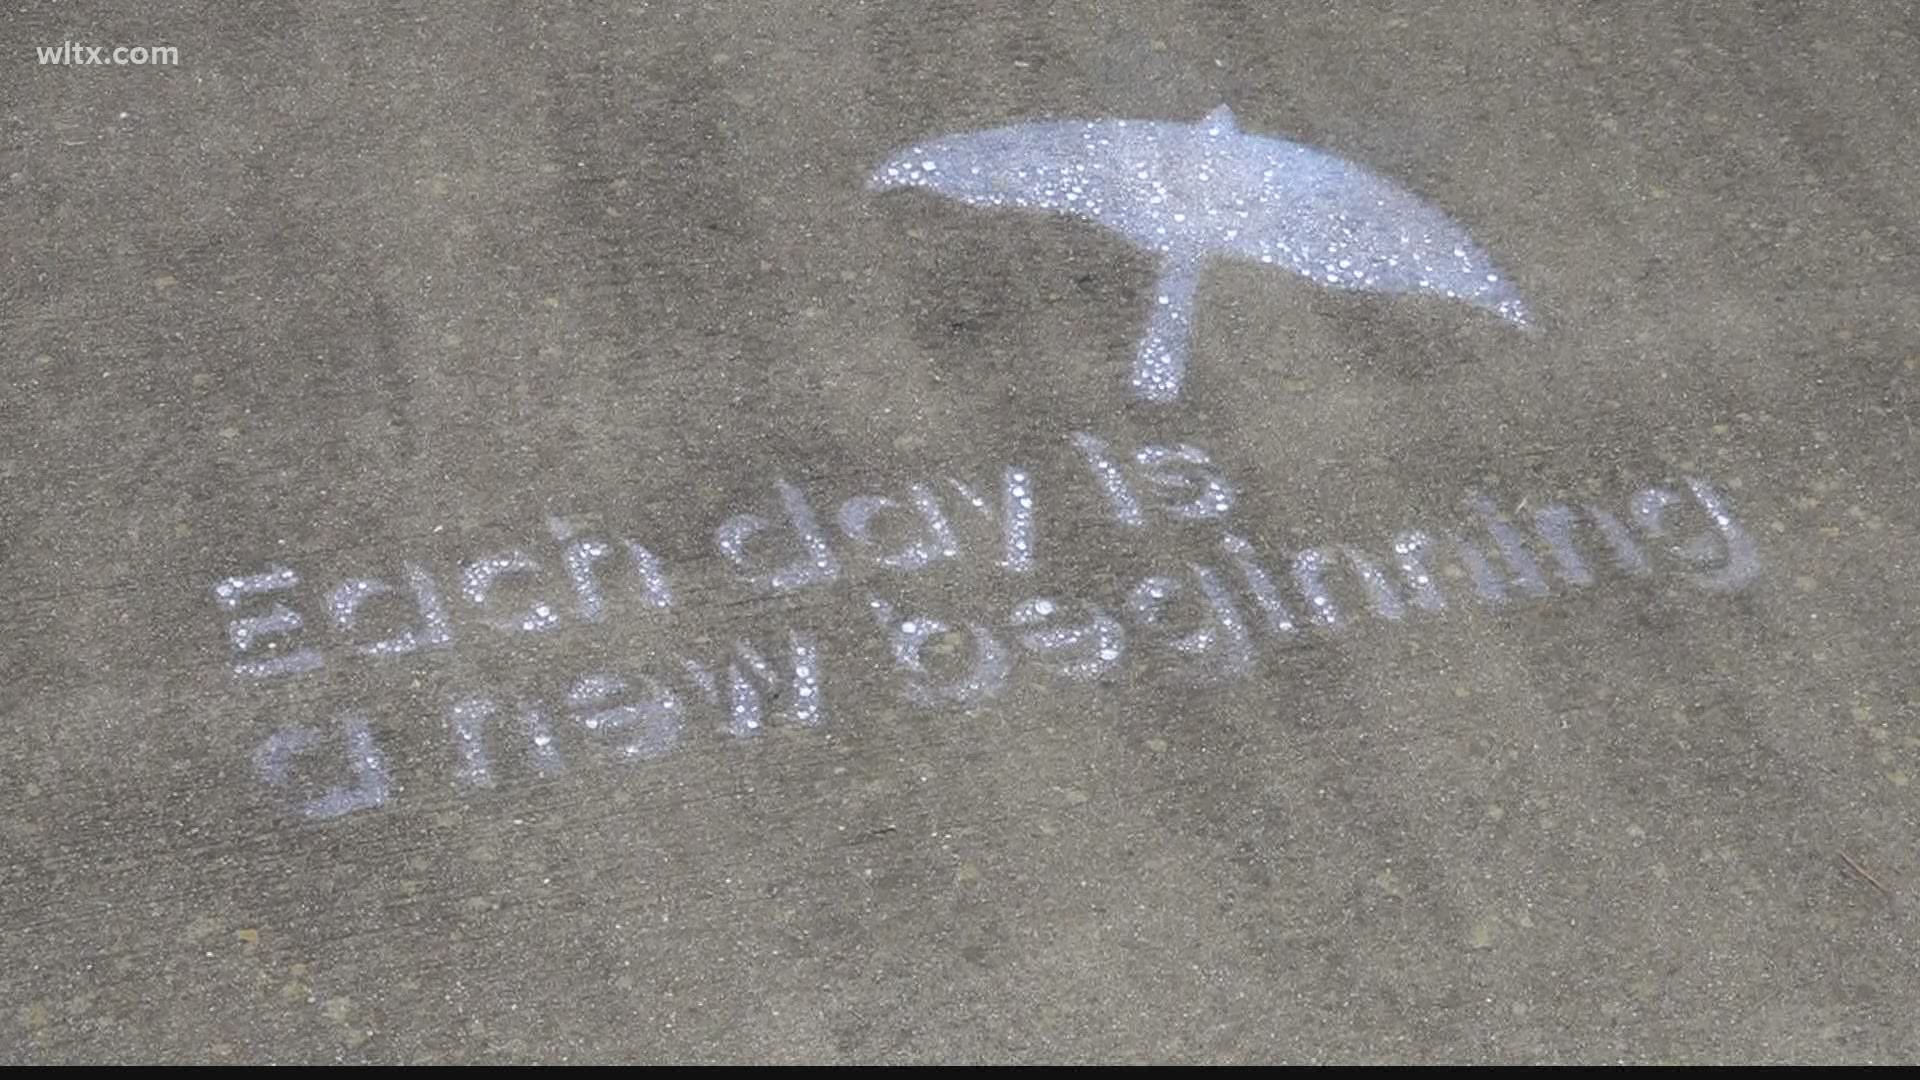 The art, on the sidewalks in Newberry, can only be seen when it rains or when the pavement gets wet.